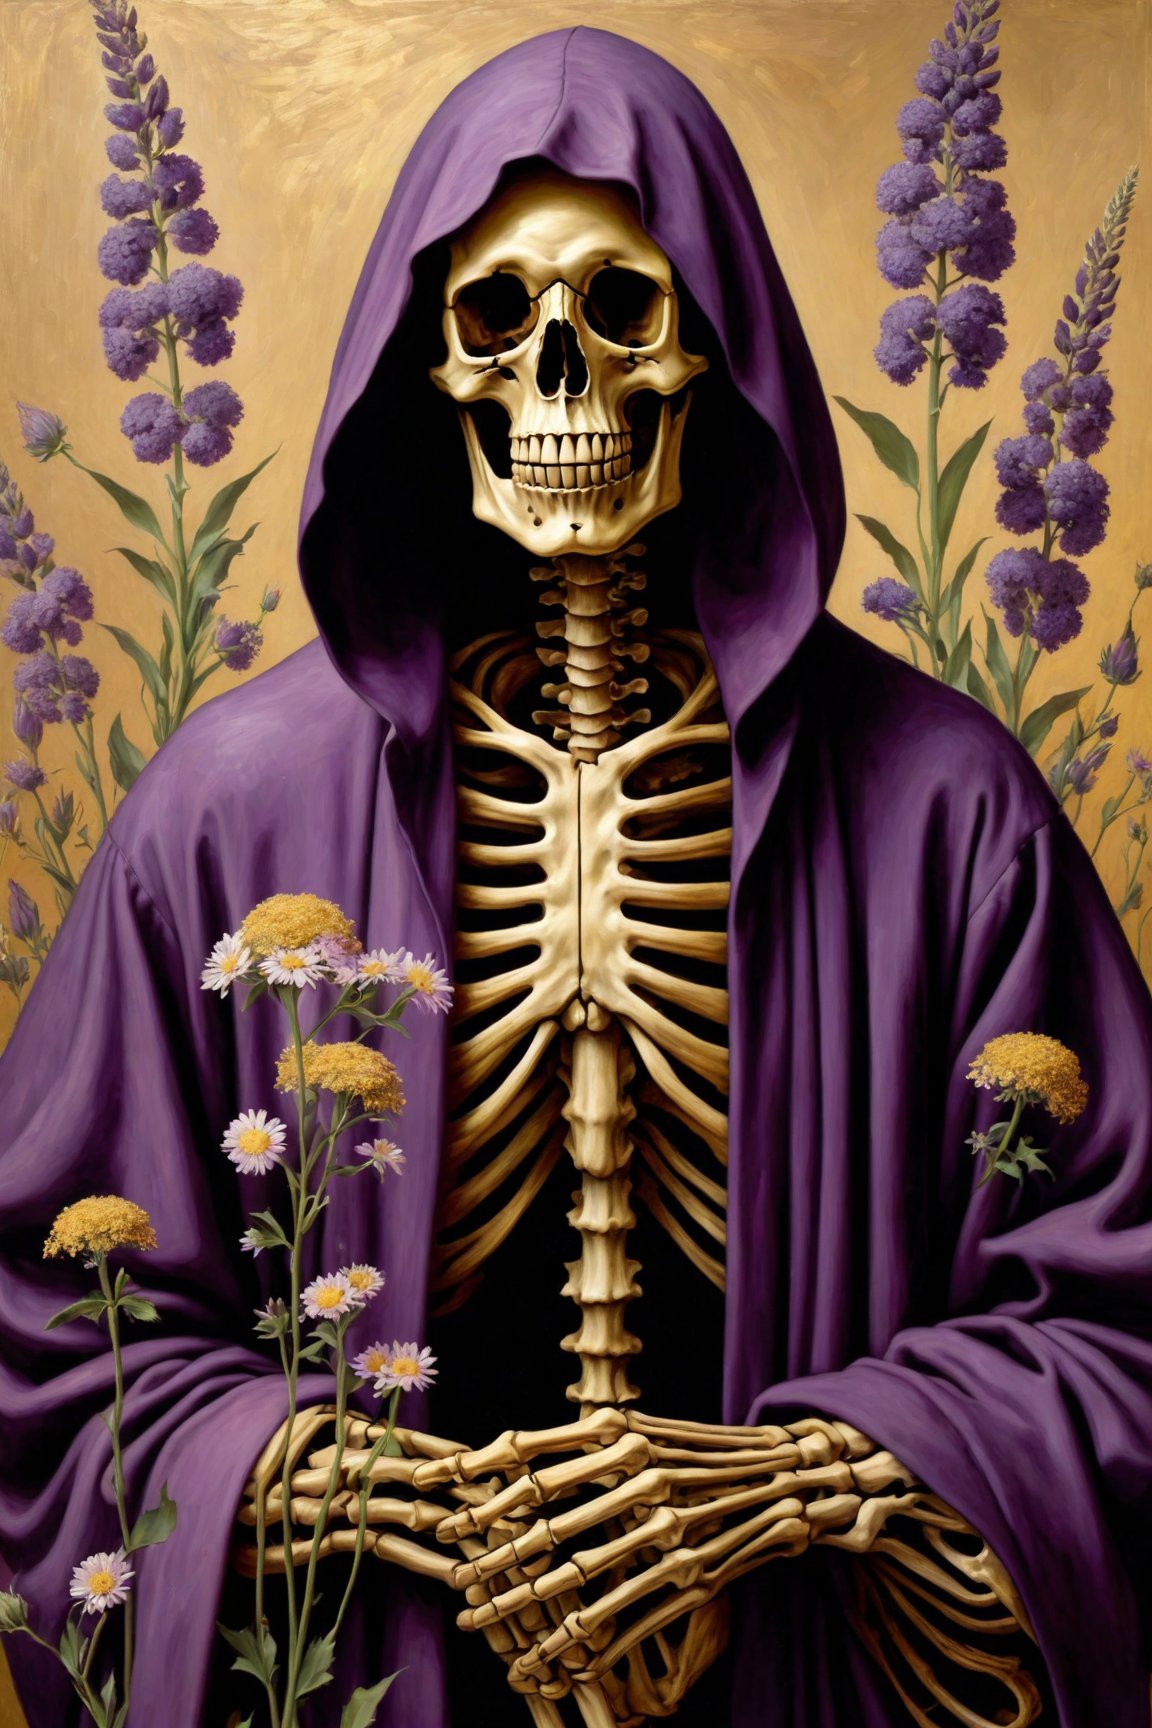 masterpiece, skeleton in a dark purple robe,hooded, light gold- colored beige background wildflowers, Natural Lighting Artists: Monet, Rene Magritte, Sandro Botticelli, Colors: Gold and purple
